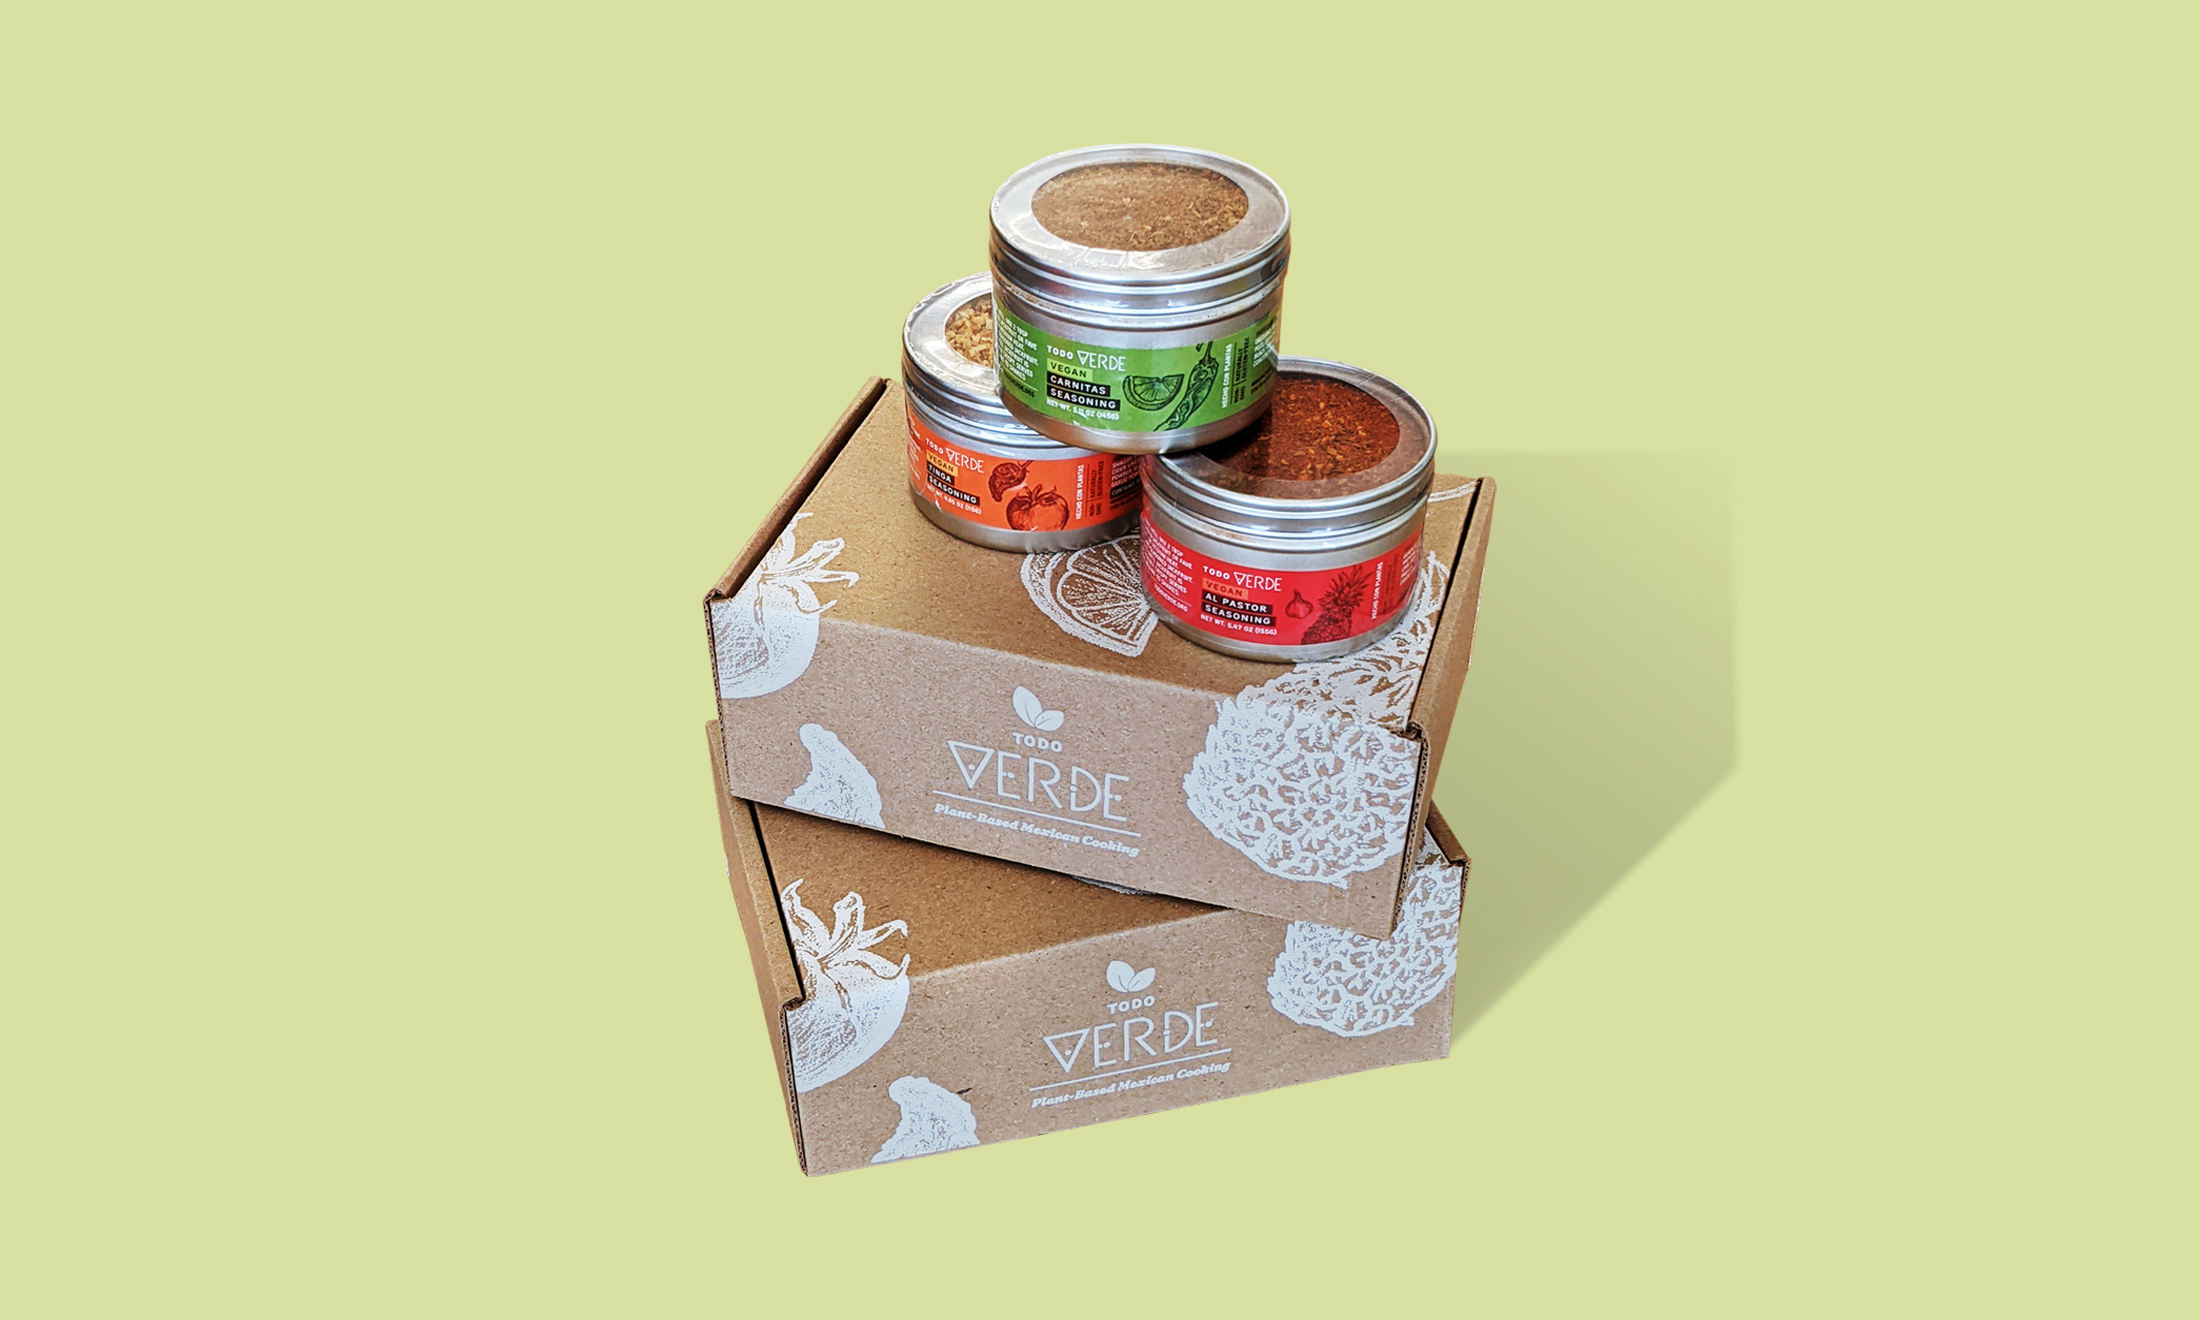 Todo Verde Box and Seasoning Tins stack, packaging designed by Kilter